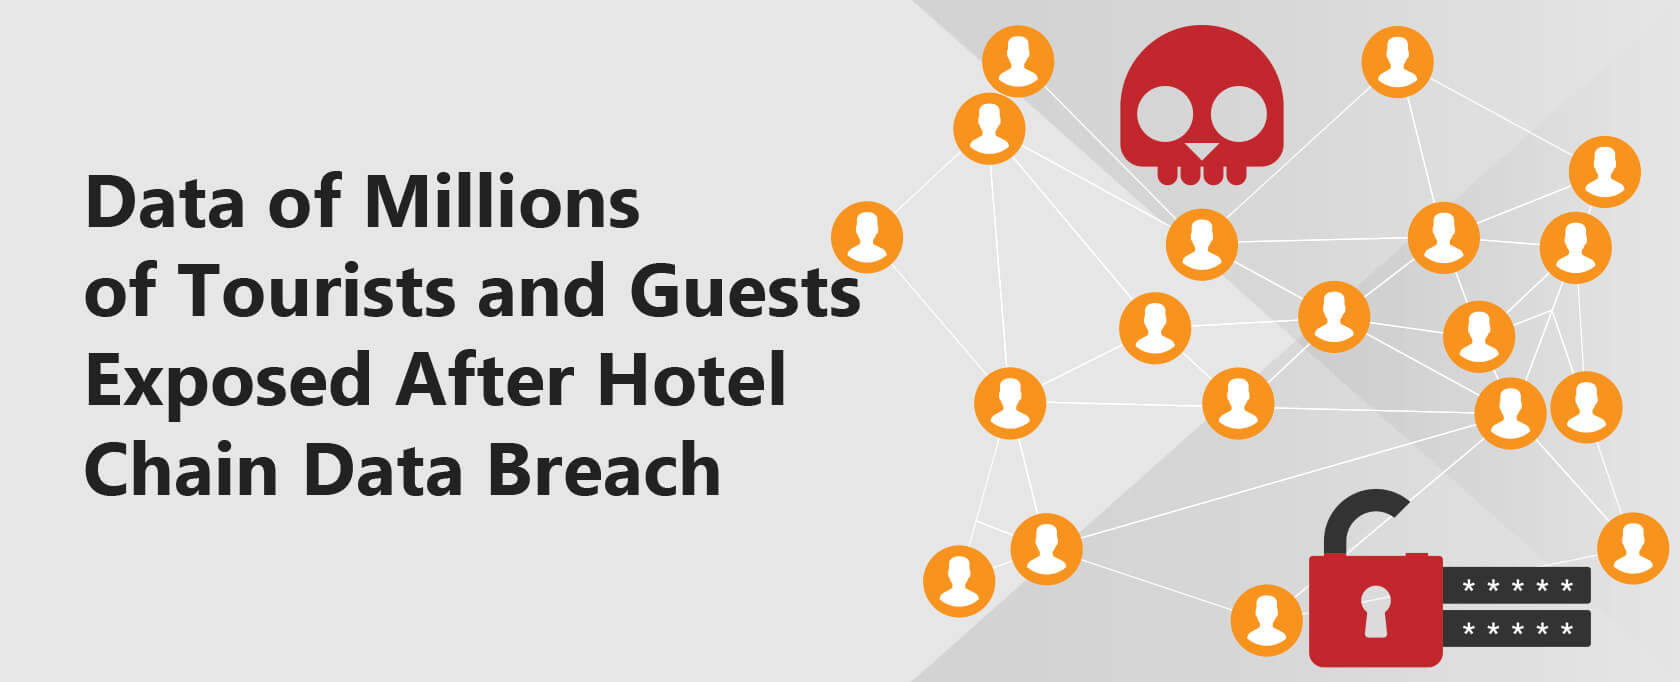 Data of Millions of Tourists and Guests Exposed After Hotel Chain Data Breach